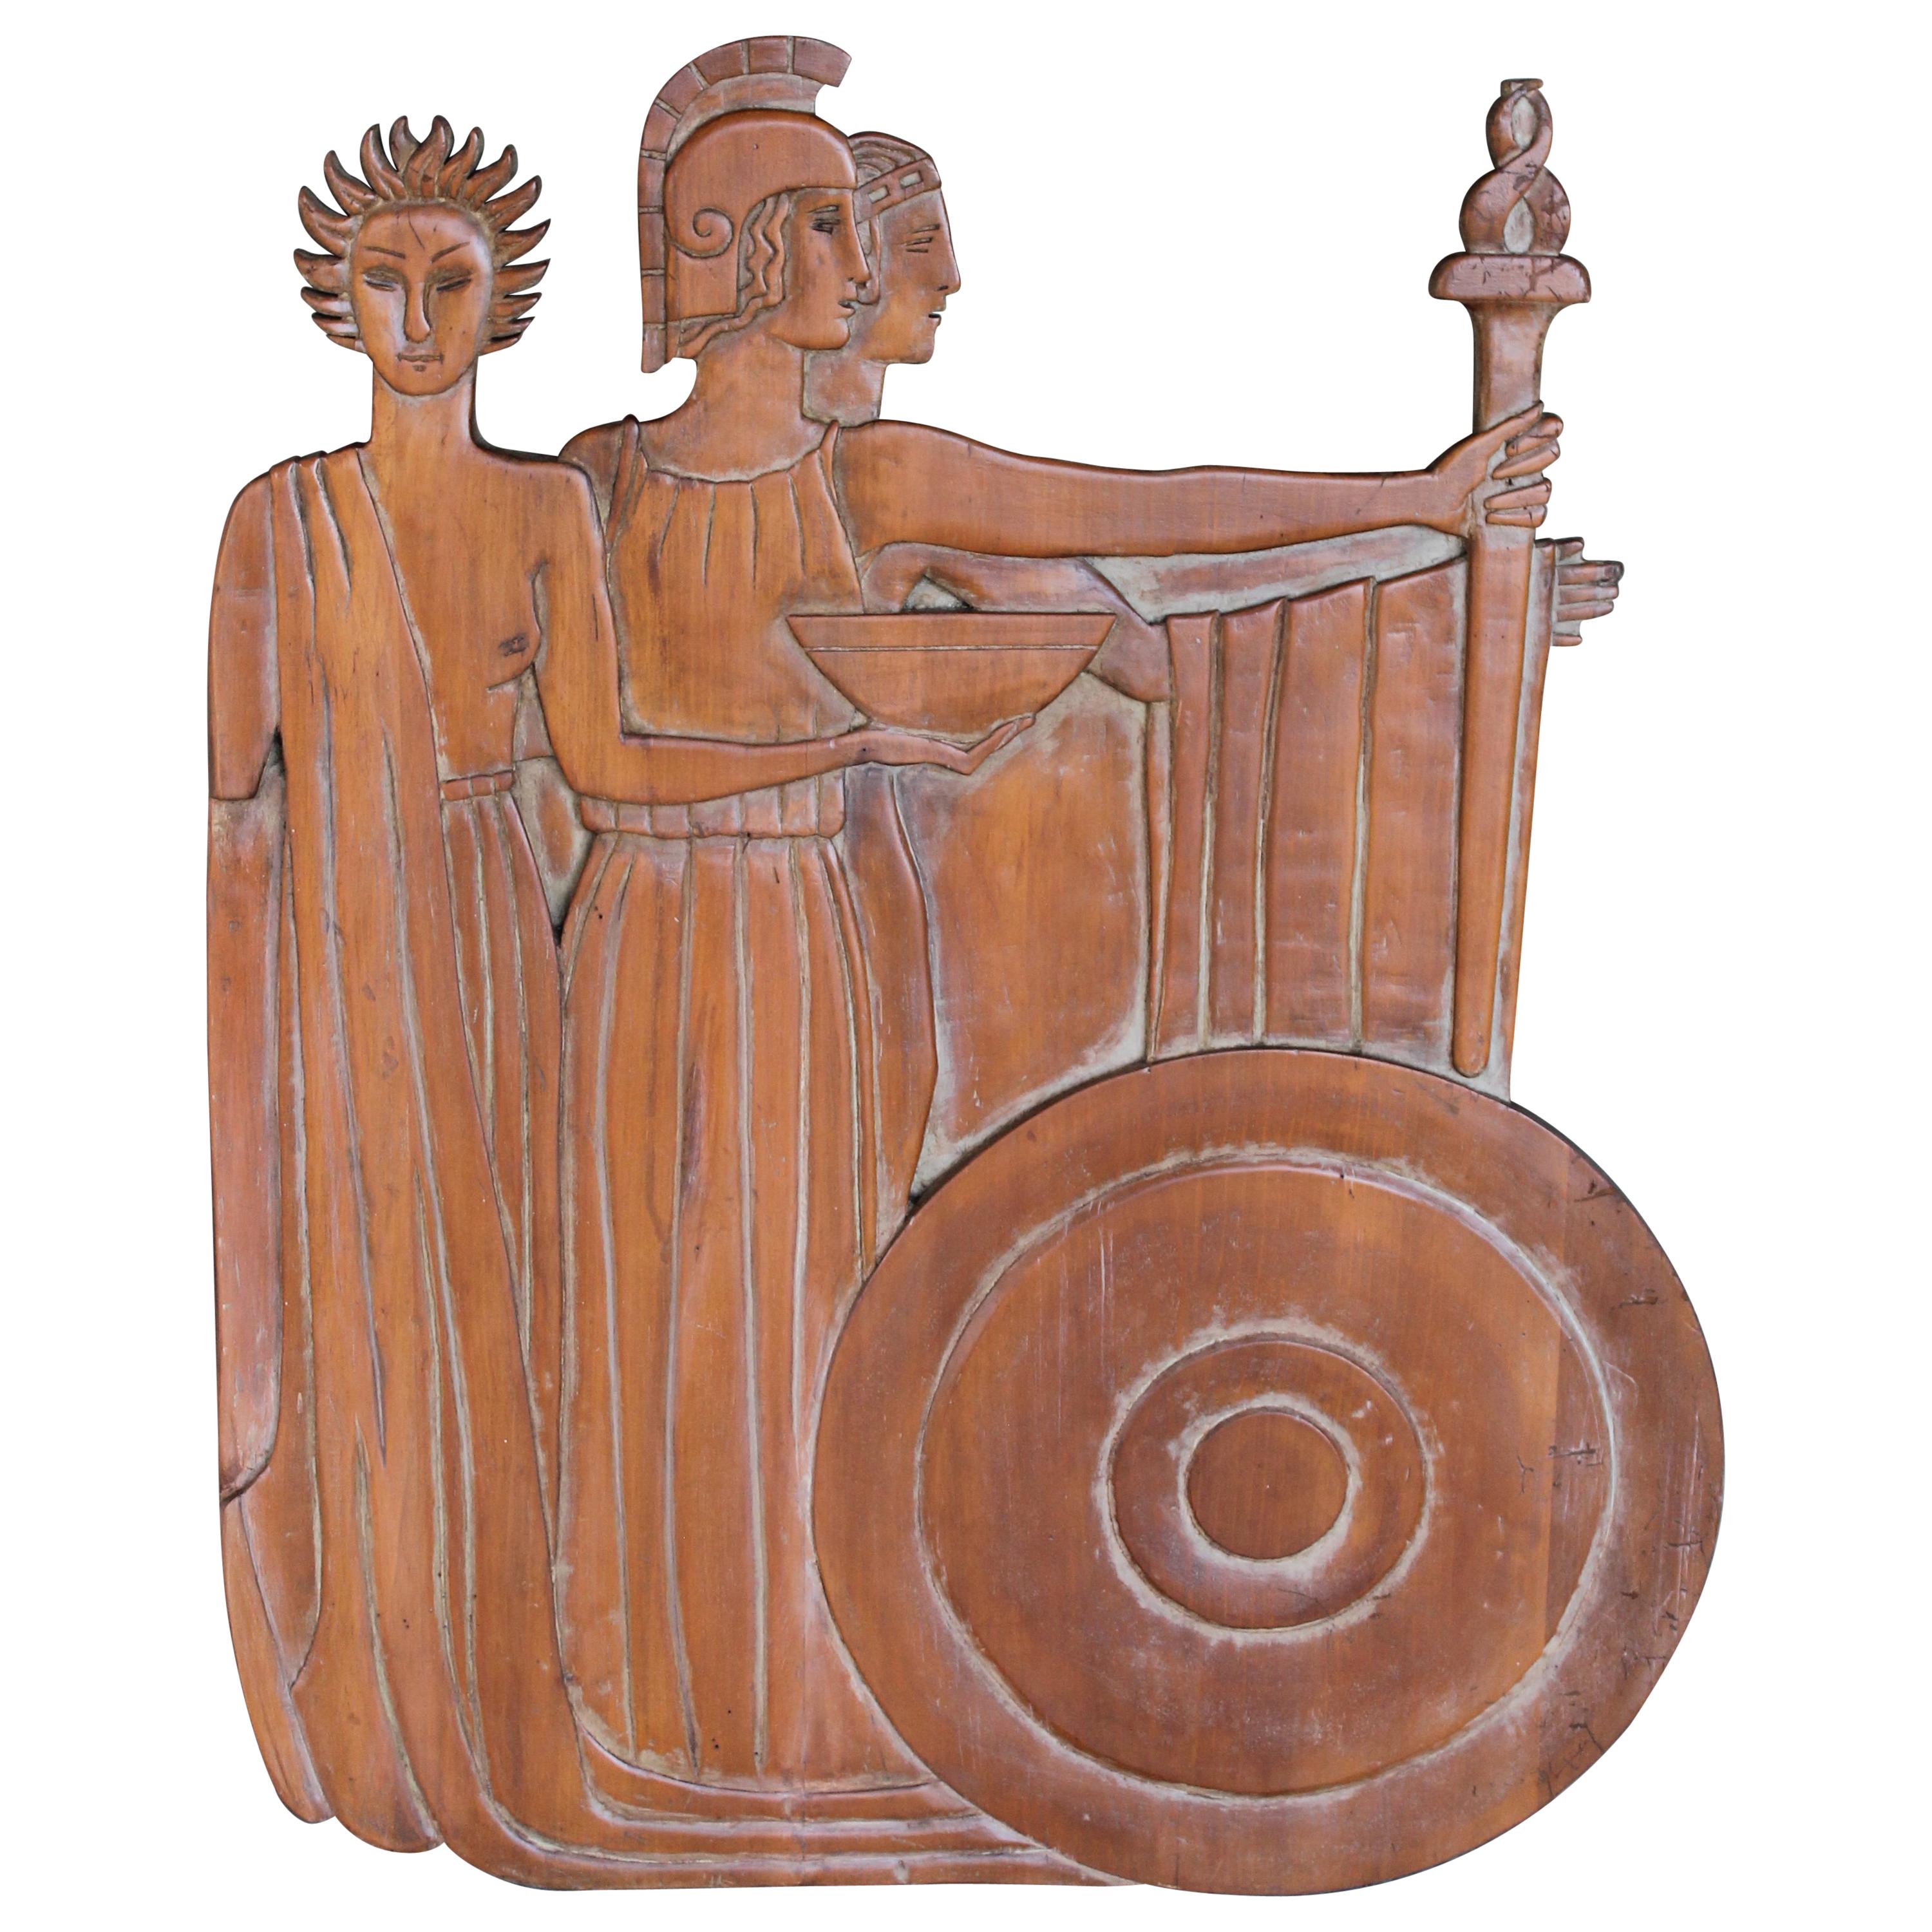 Wood Carving Wall Sculpture Ancient Rome